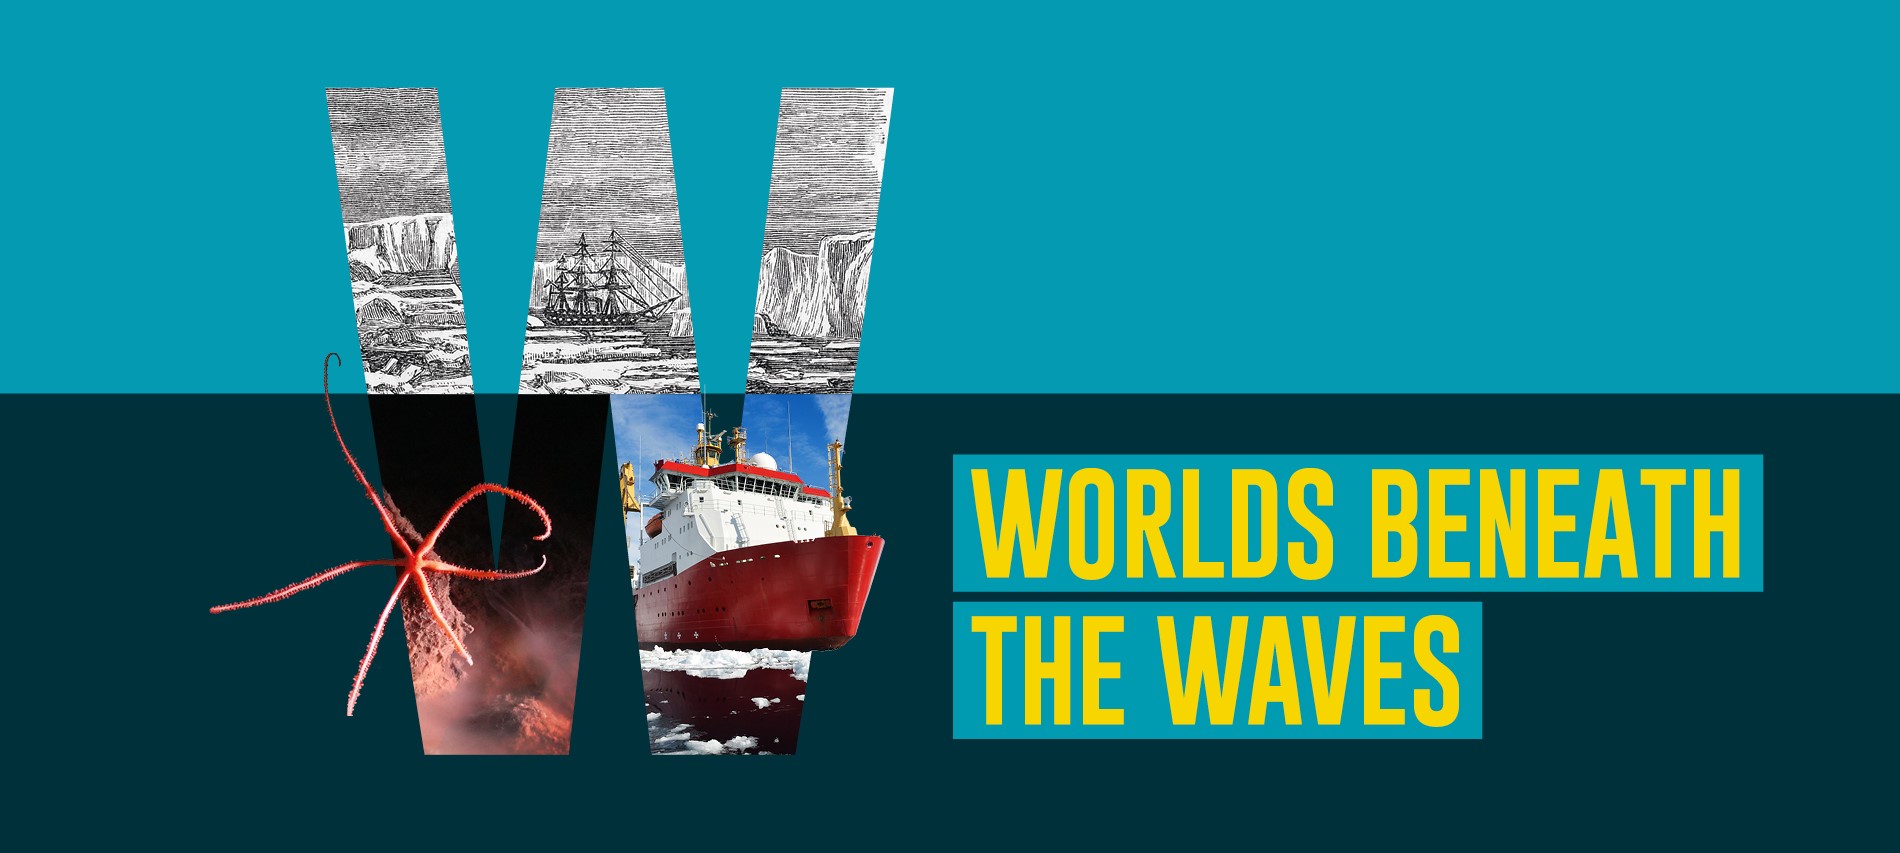 Worlds Beneath the Waves web banner